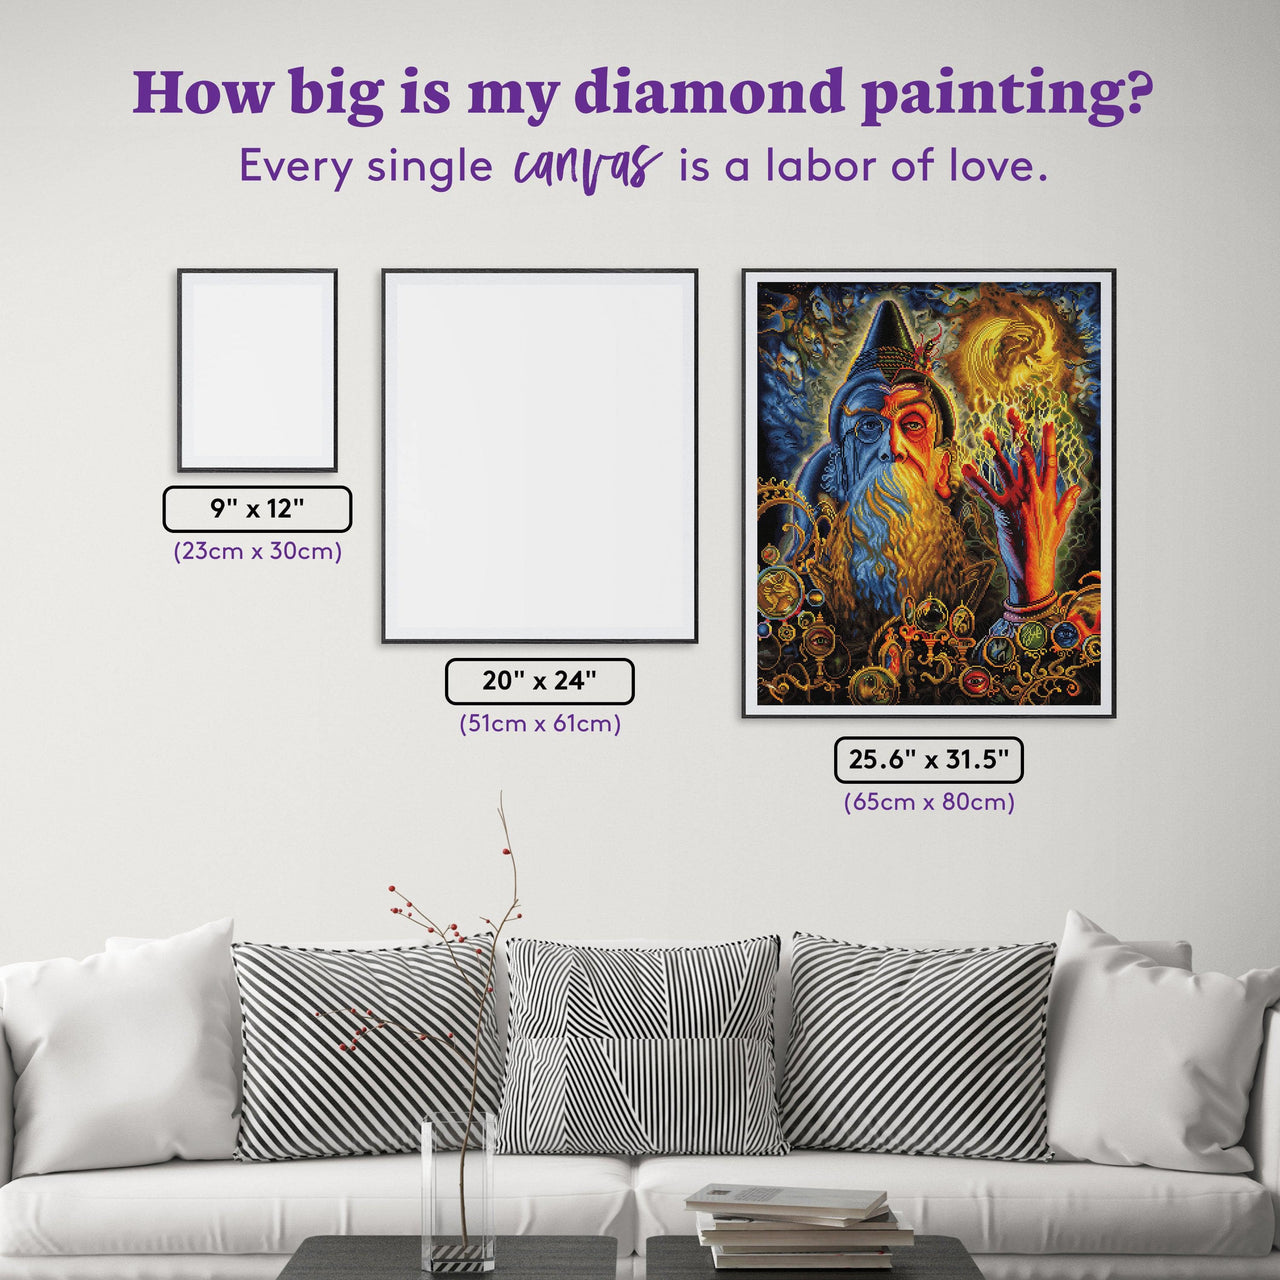 Diamond Painting Seer 25.6" x 31.5" (65cm x 80cm) / Square with 58 Colors including 4 ABs / 83,781